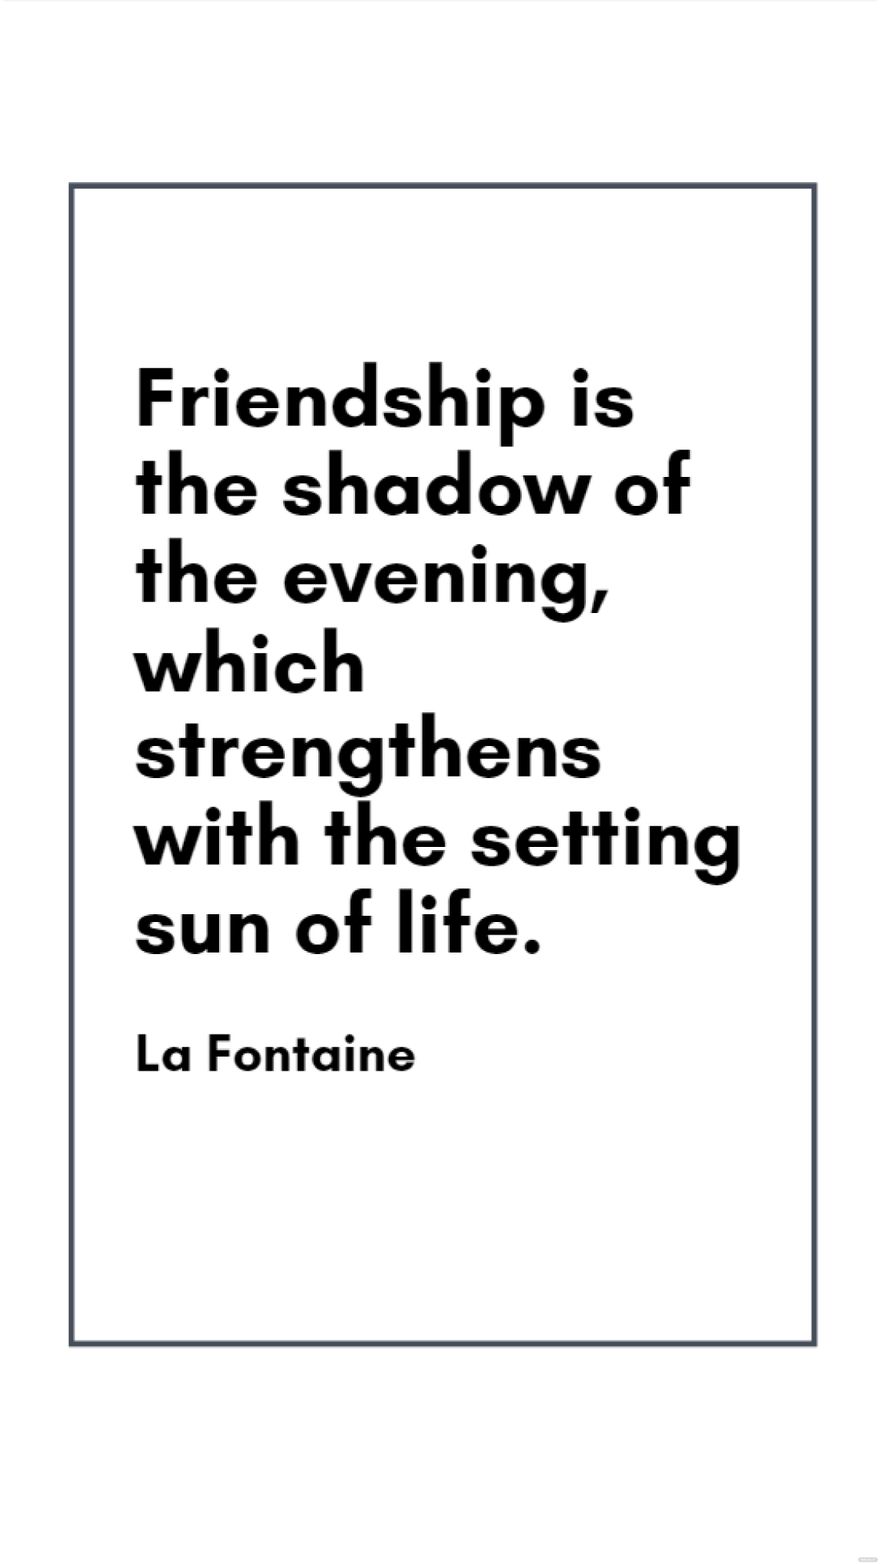 La Fontaine - Friendship is the shadow of the evening, which strengthens with the setting sun of life. in JPG